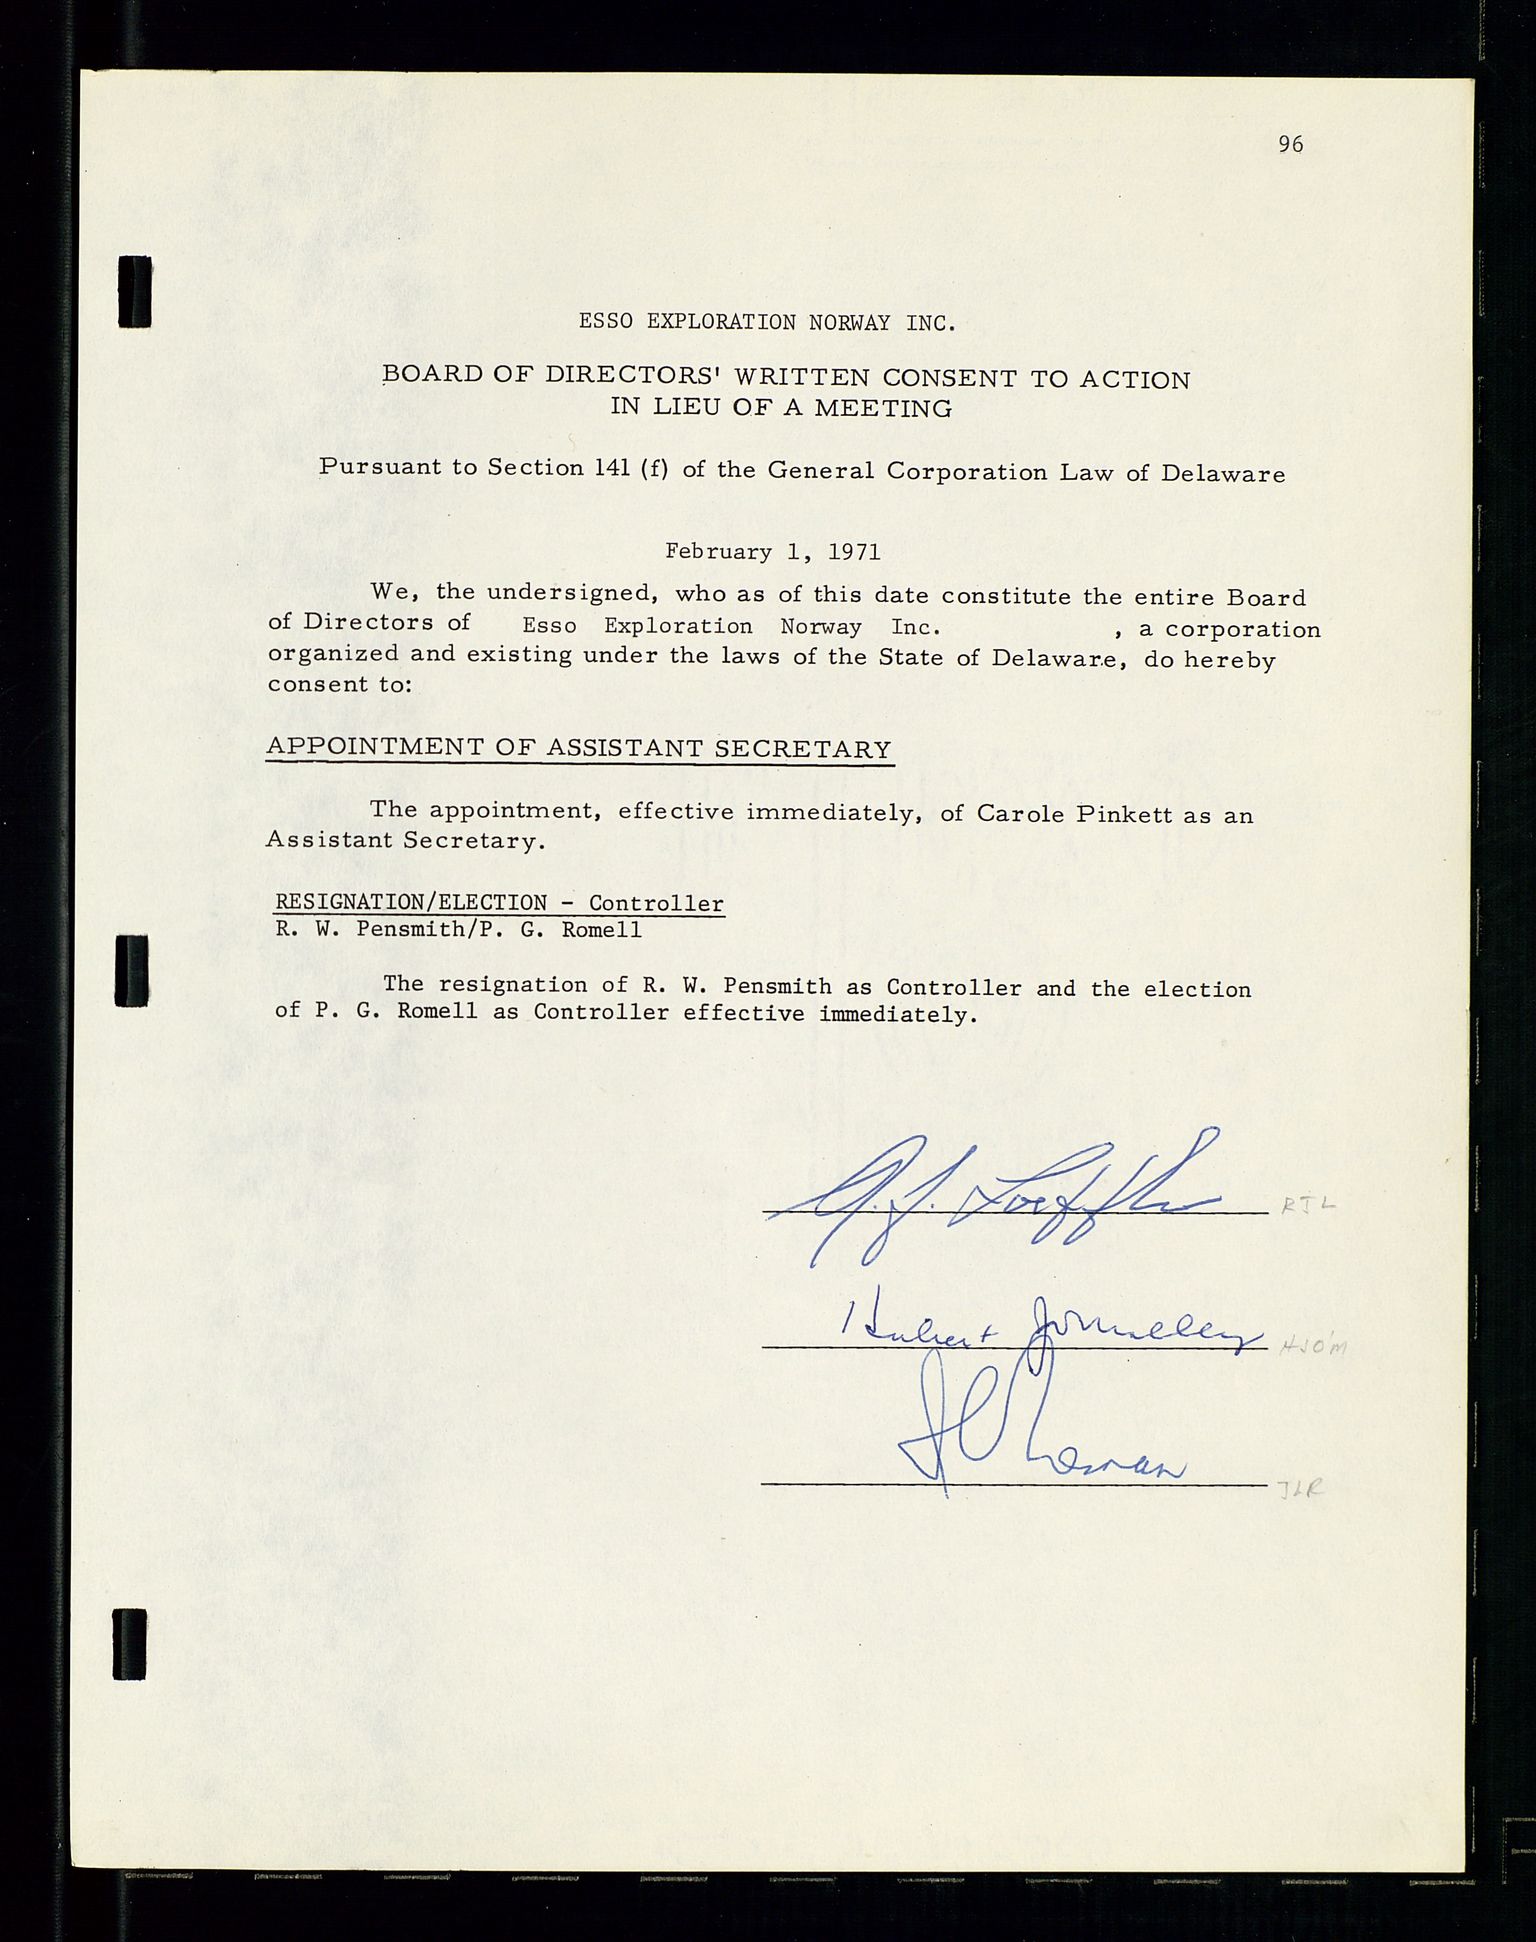 Pa 1512 - Esso Exploration and Production Norway Inc., SAST/A-101917/A/Aa/L0001/0001: Styredokumenter / Corporate records, By-Laws, Board meeting minutes, Incorporations, 1965-1975, s. 96